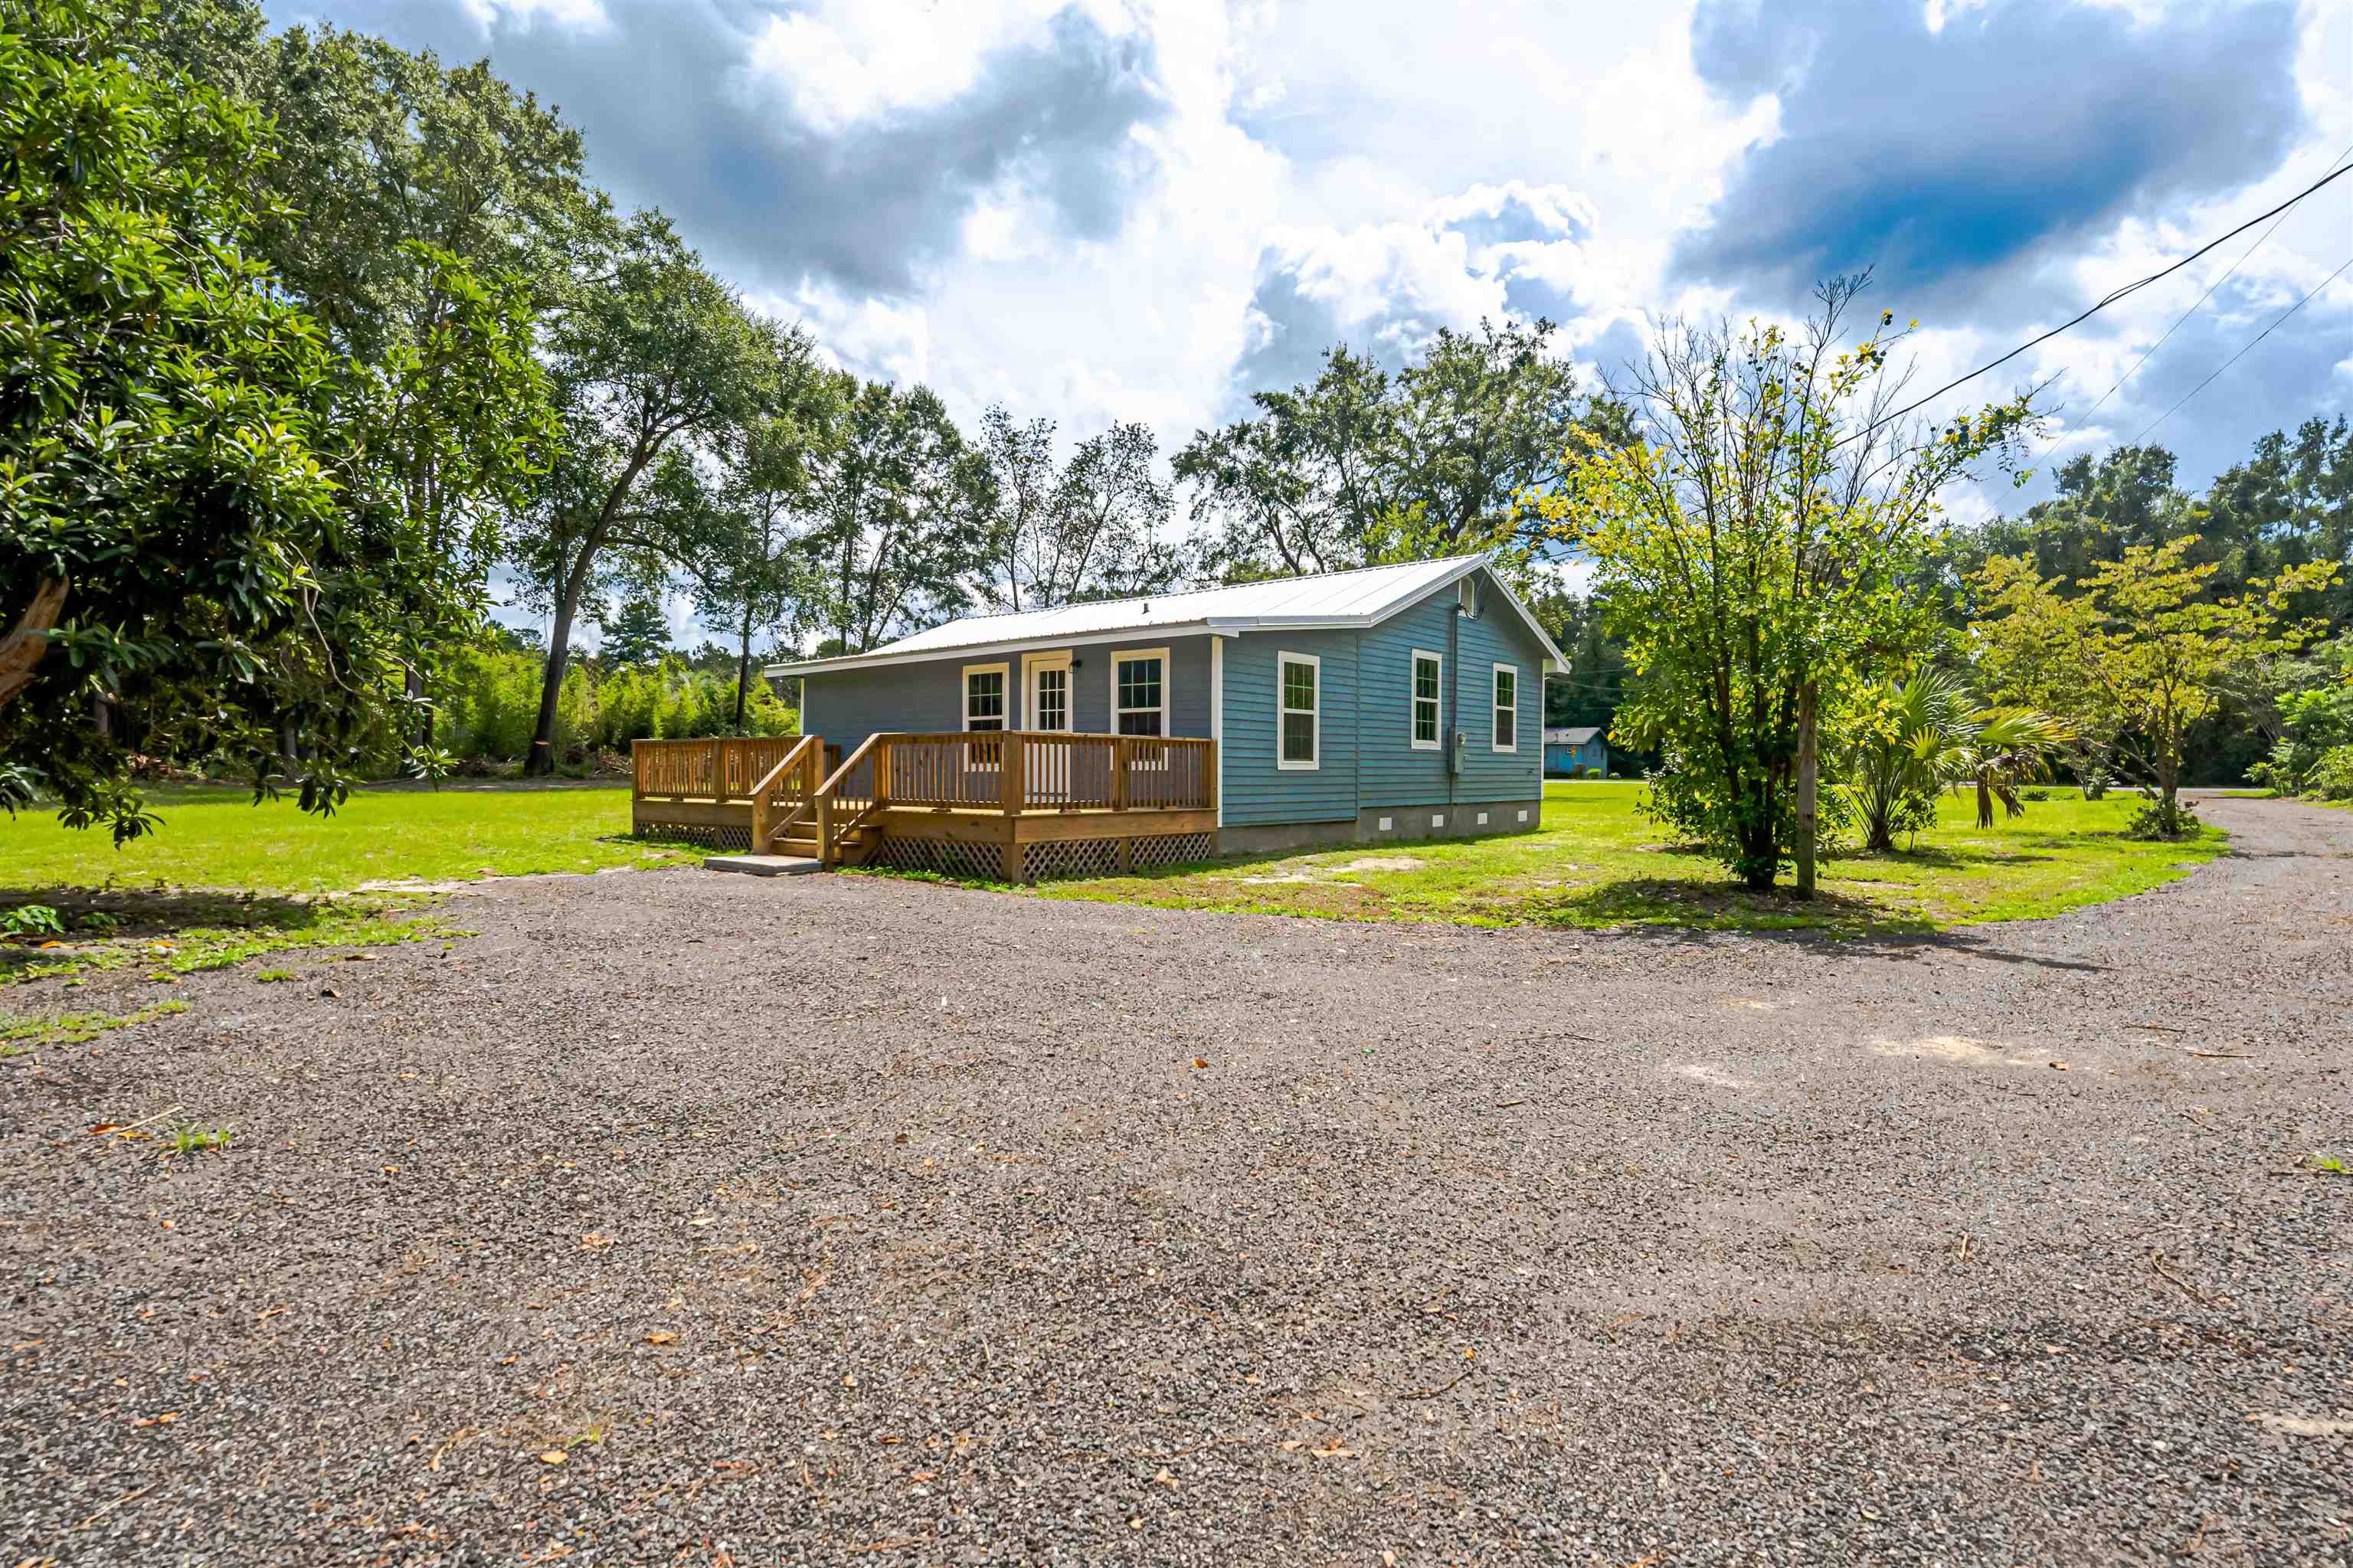 This Three-bedroom and two-bathroom home was built in 1982, but recently has been updated and boasts clean lines. Located in the Havana area just minutes from Tallahassee. This cozy home has a large back porch where you can sit and relax after a busy day, and inside, the open design is sure to make family time quality time. The kitchen has all updated whirlpool appliances and granite countertops and is very spacious for hosting your family events. This luxurious home features impeccable finishes throughout, from beautiful flooring to an amazing master bathroom. The updated interiors feature a soft monochromatic palette and clean lines. The large green 1.8 acres is great for hosting parties or family events there is a great spot to install a pool. If quiet country living is what you need without any inconvenience well this is your home!